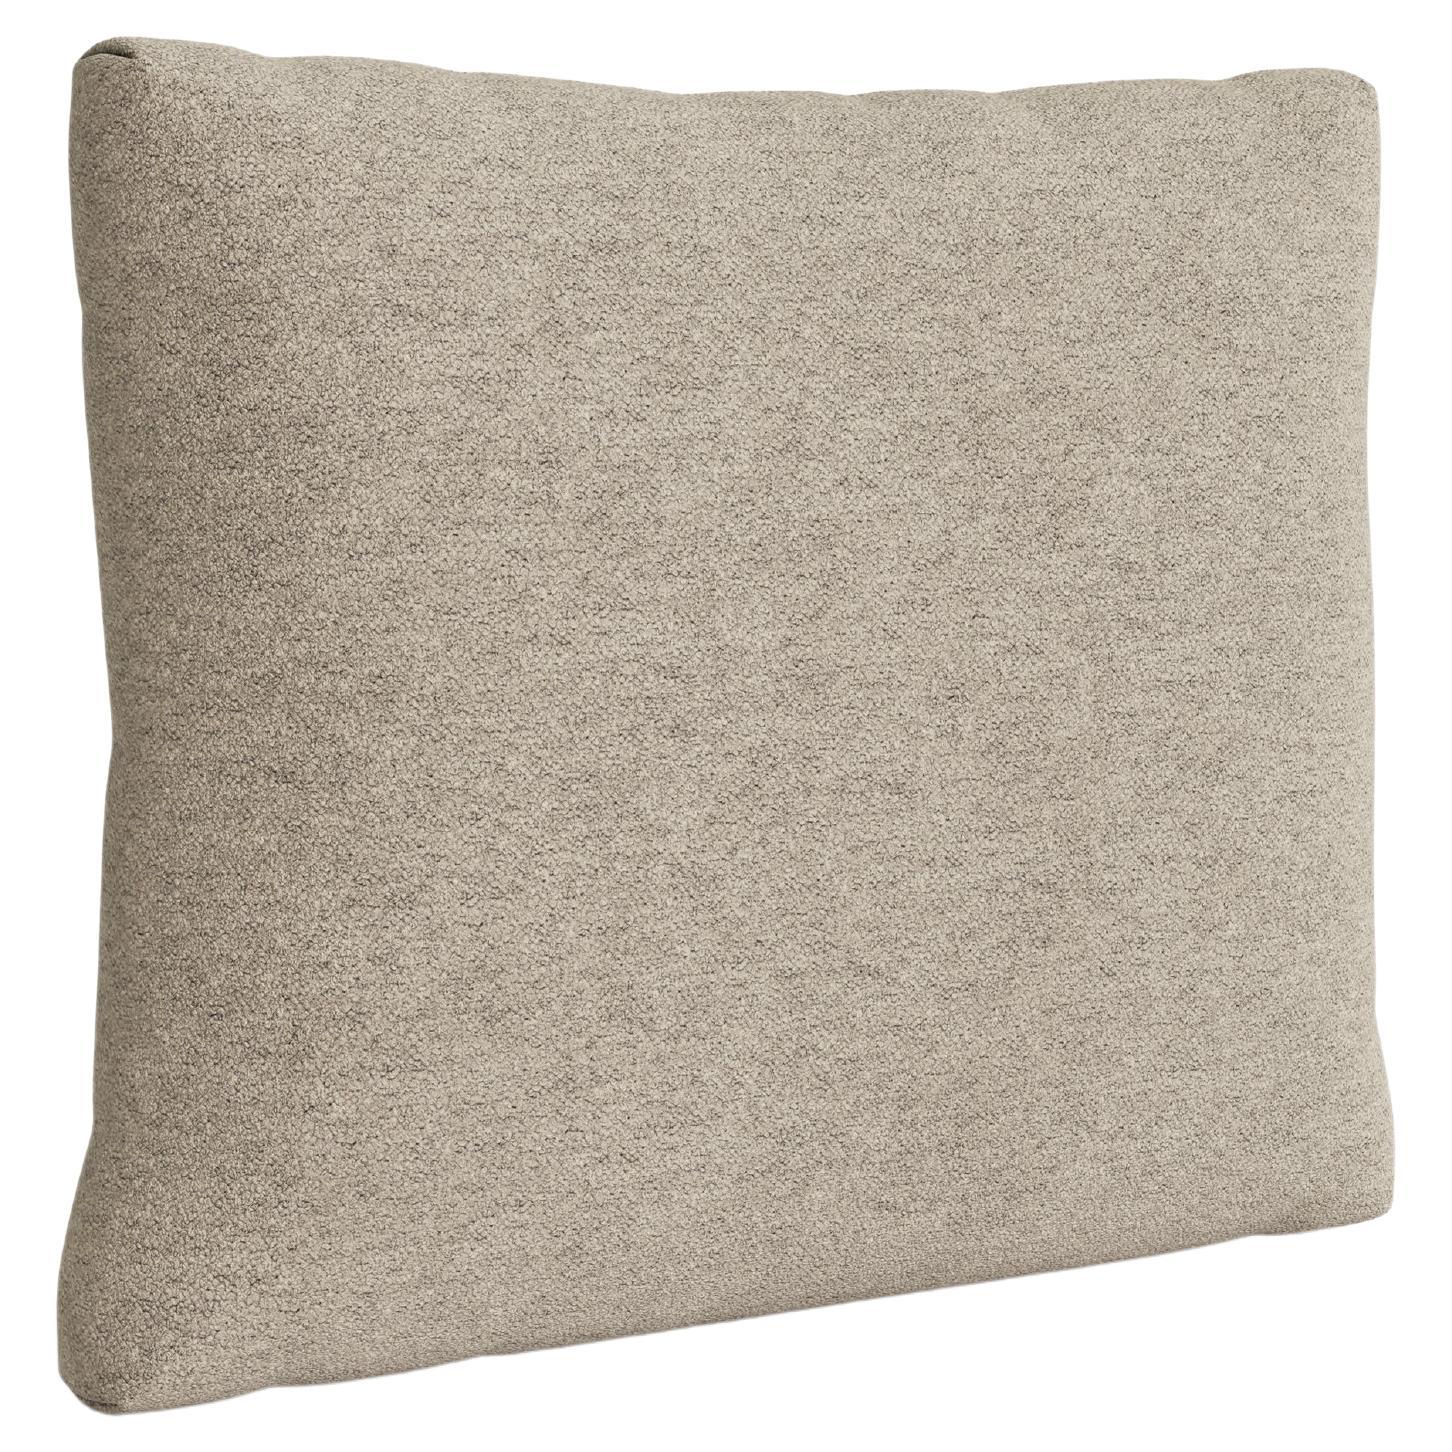 Riff Large Cushion by NORR11